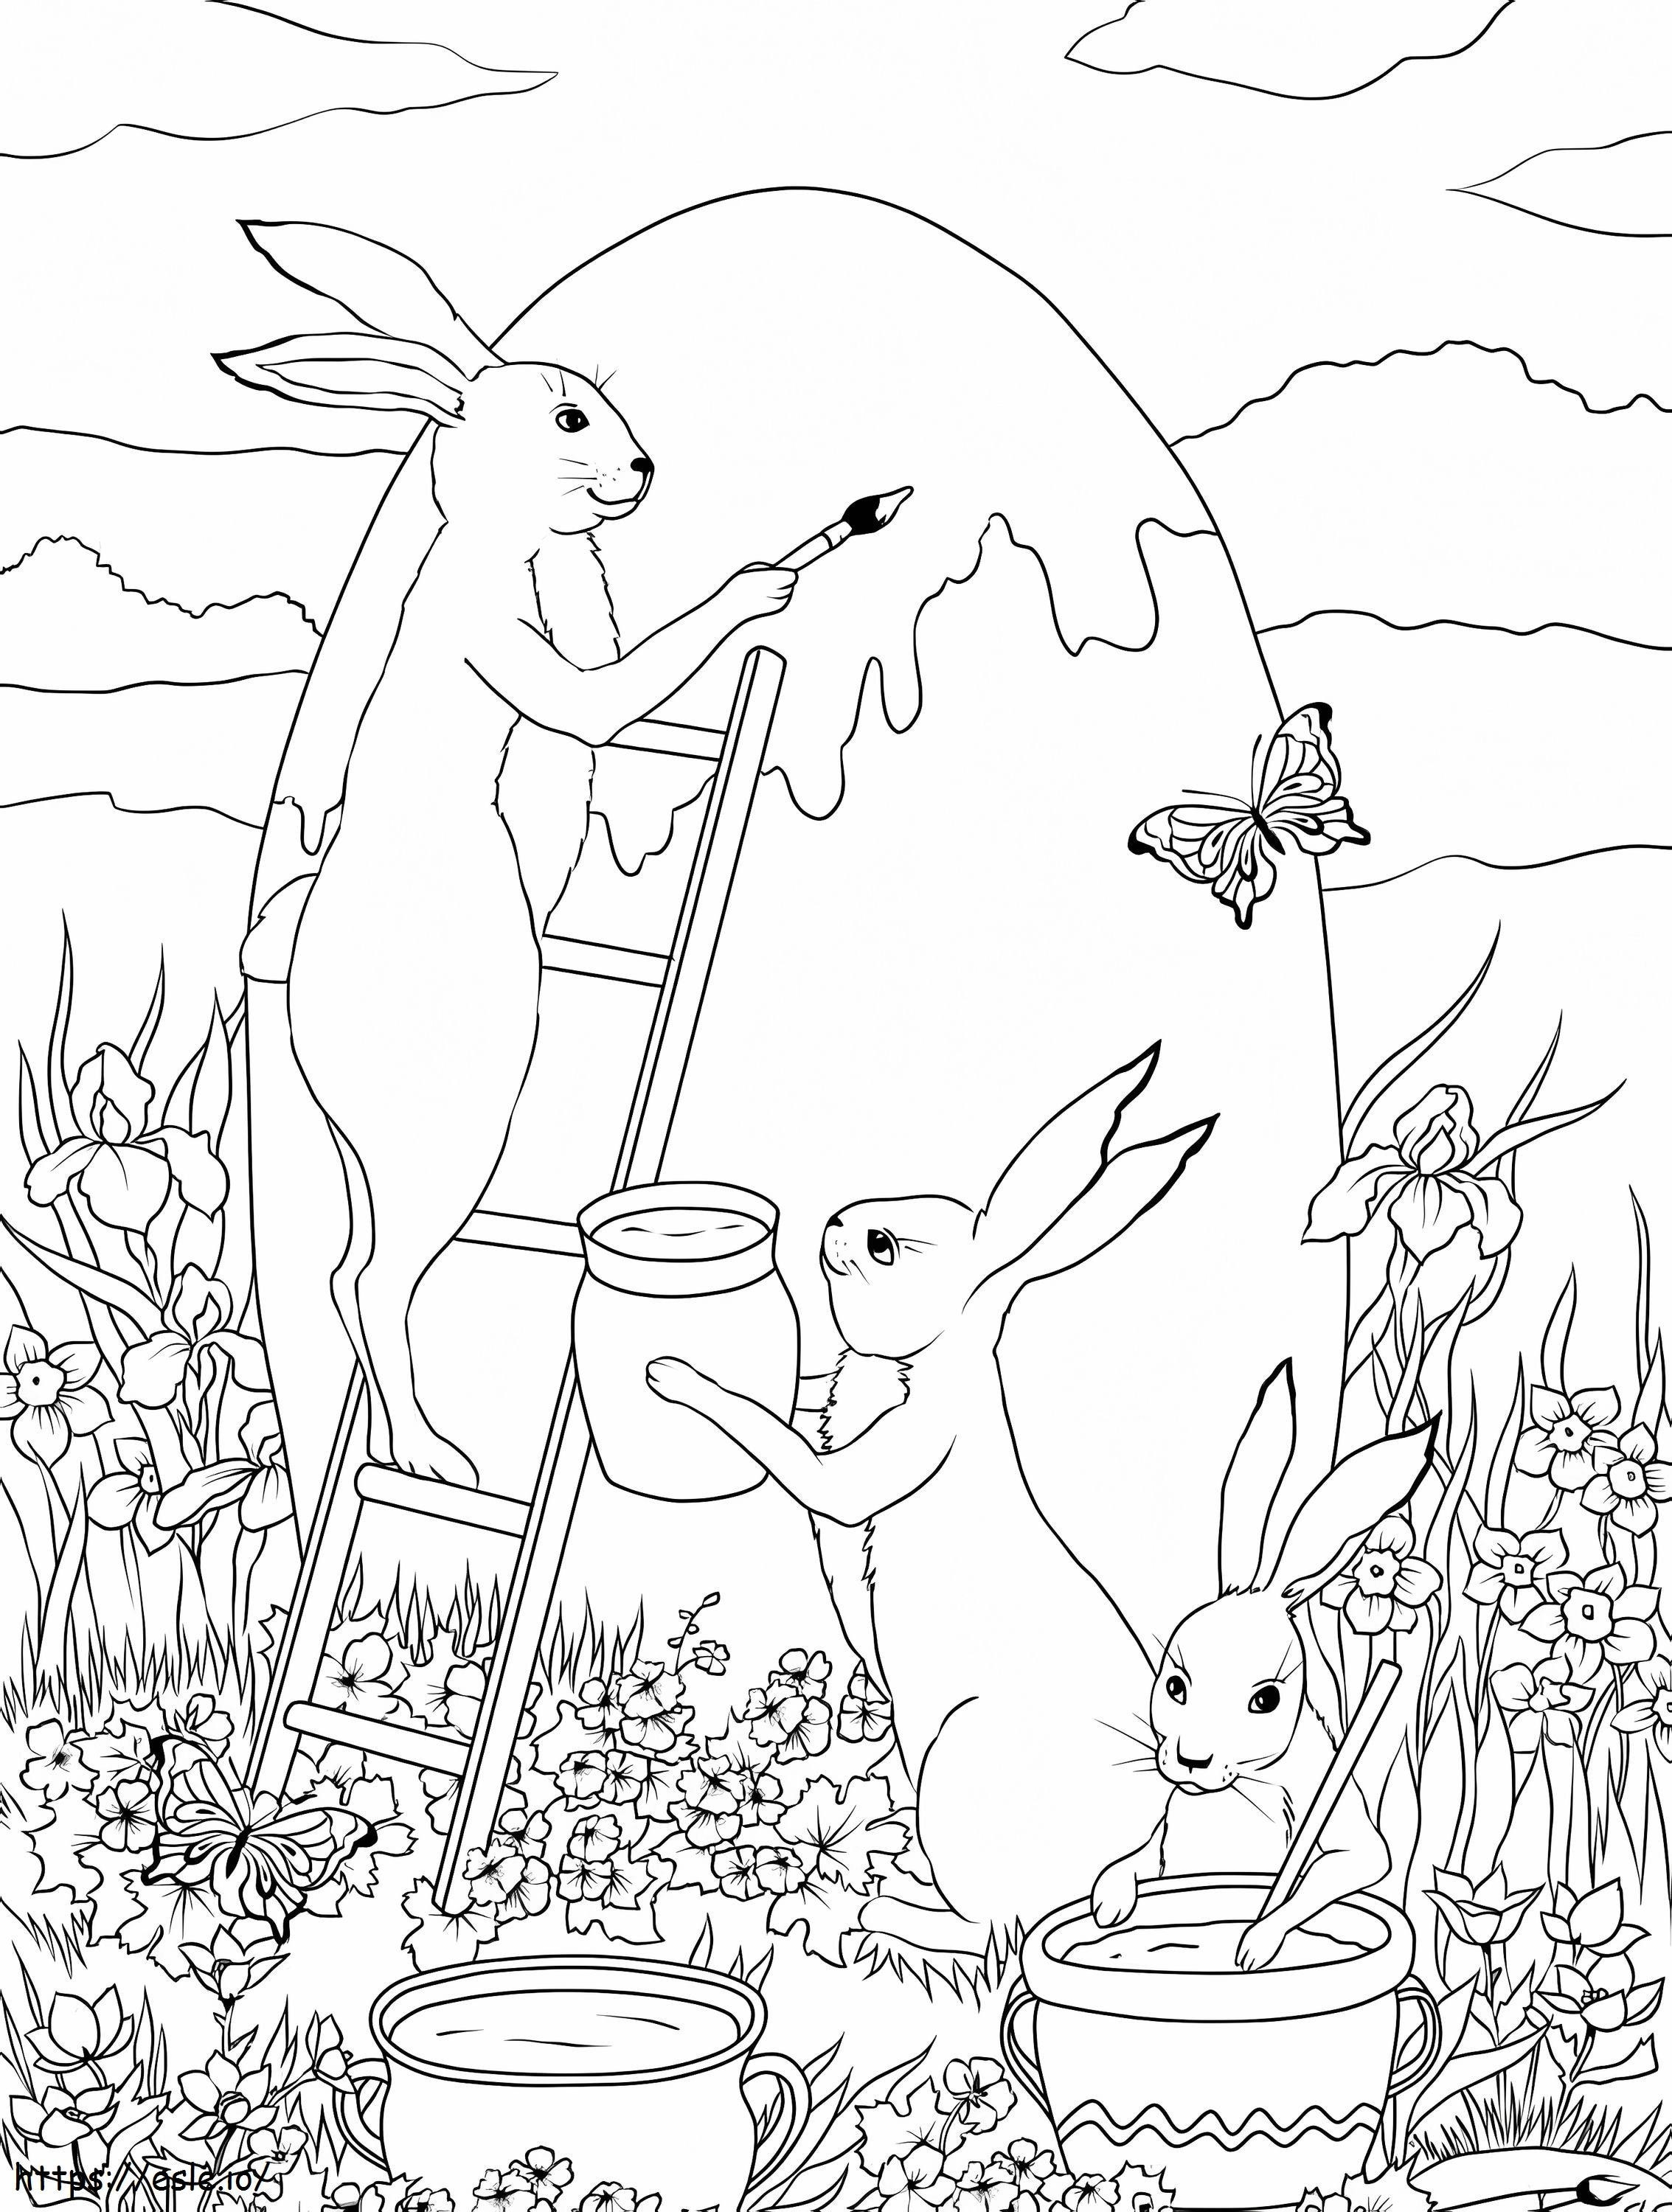 Lovely Easter Bunnies coloring page